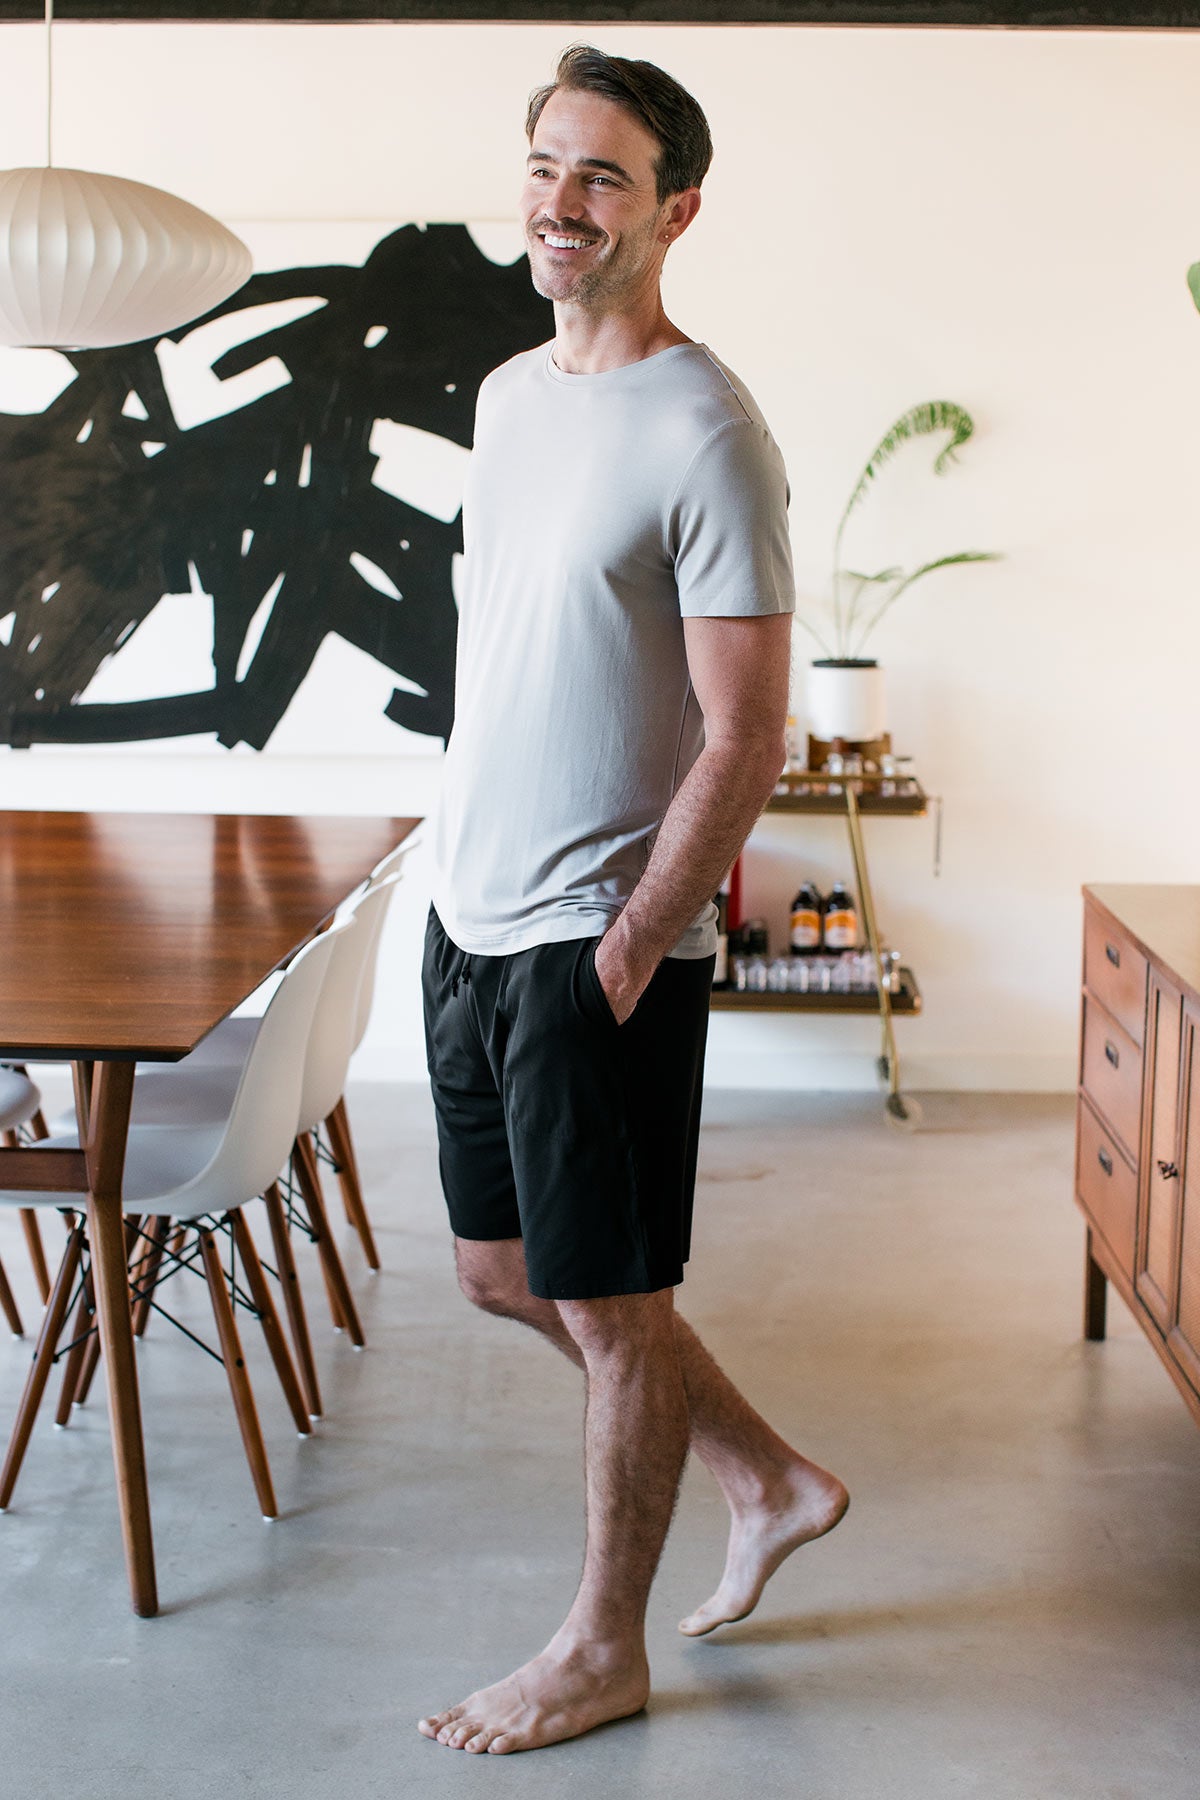 A man walking forward an looking to the side, wearing Yala Men's Mateo ButterSoft Bamboo Lounge Shorts in Black